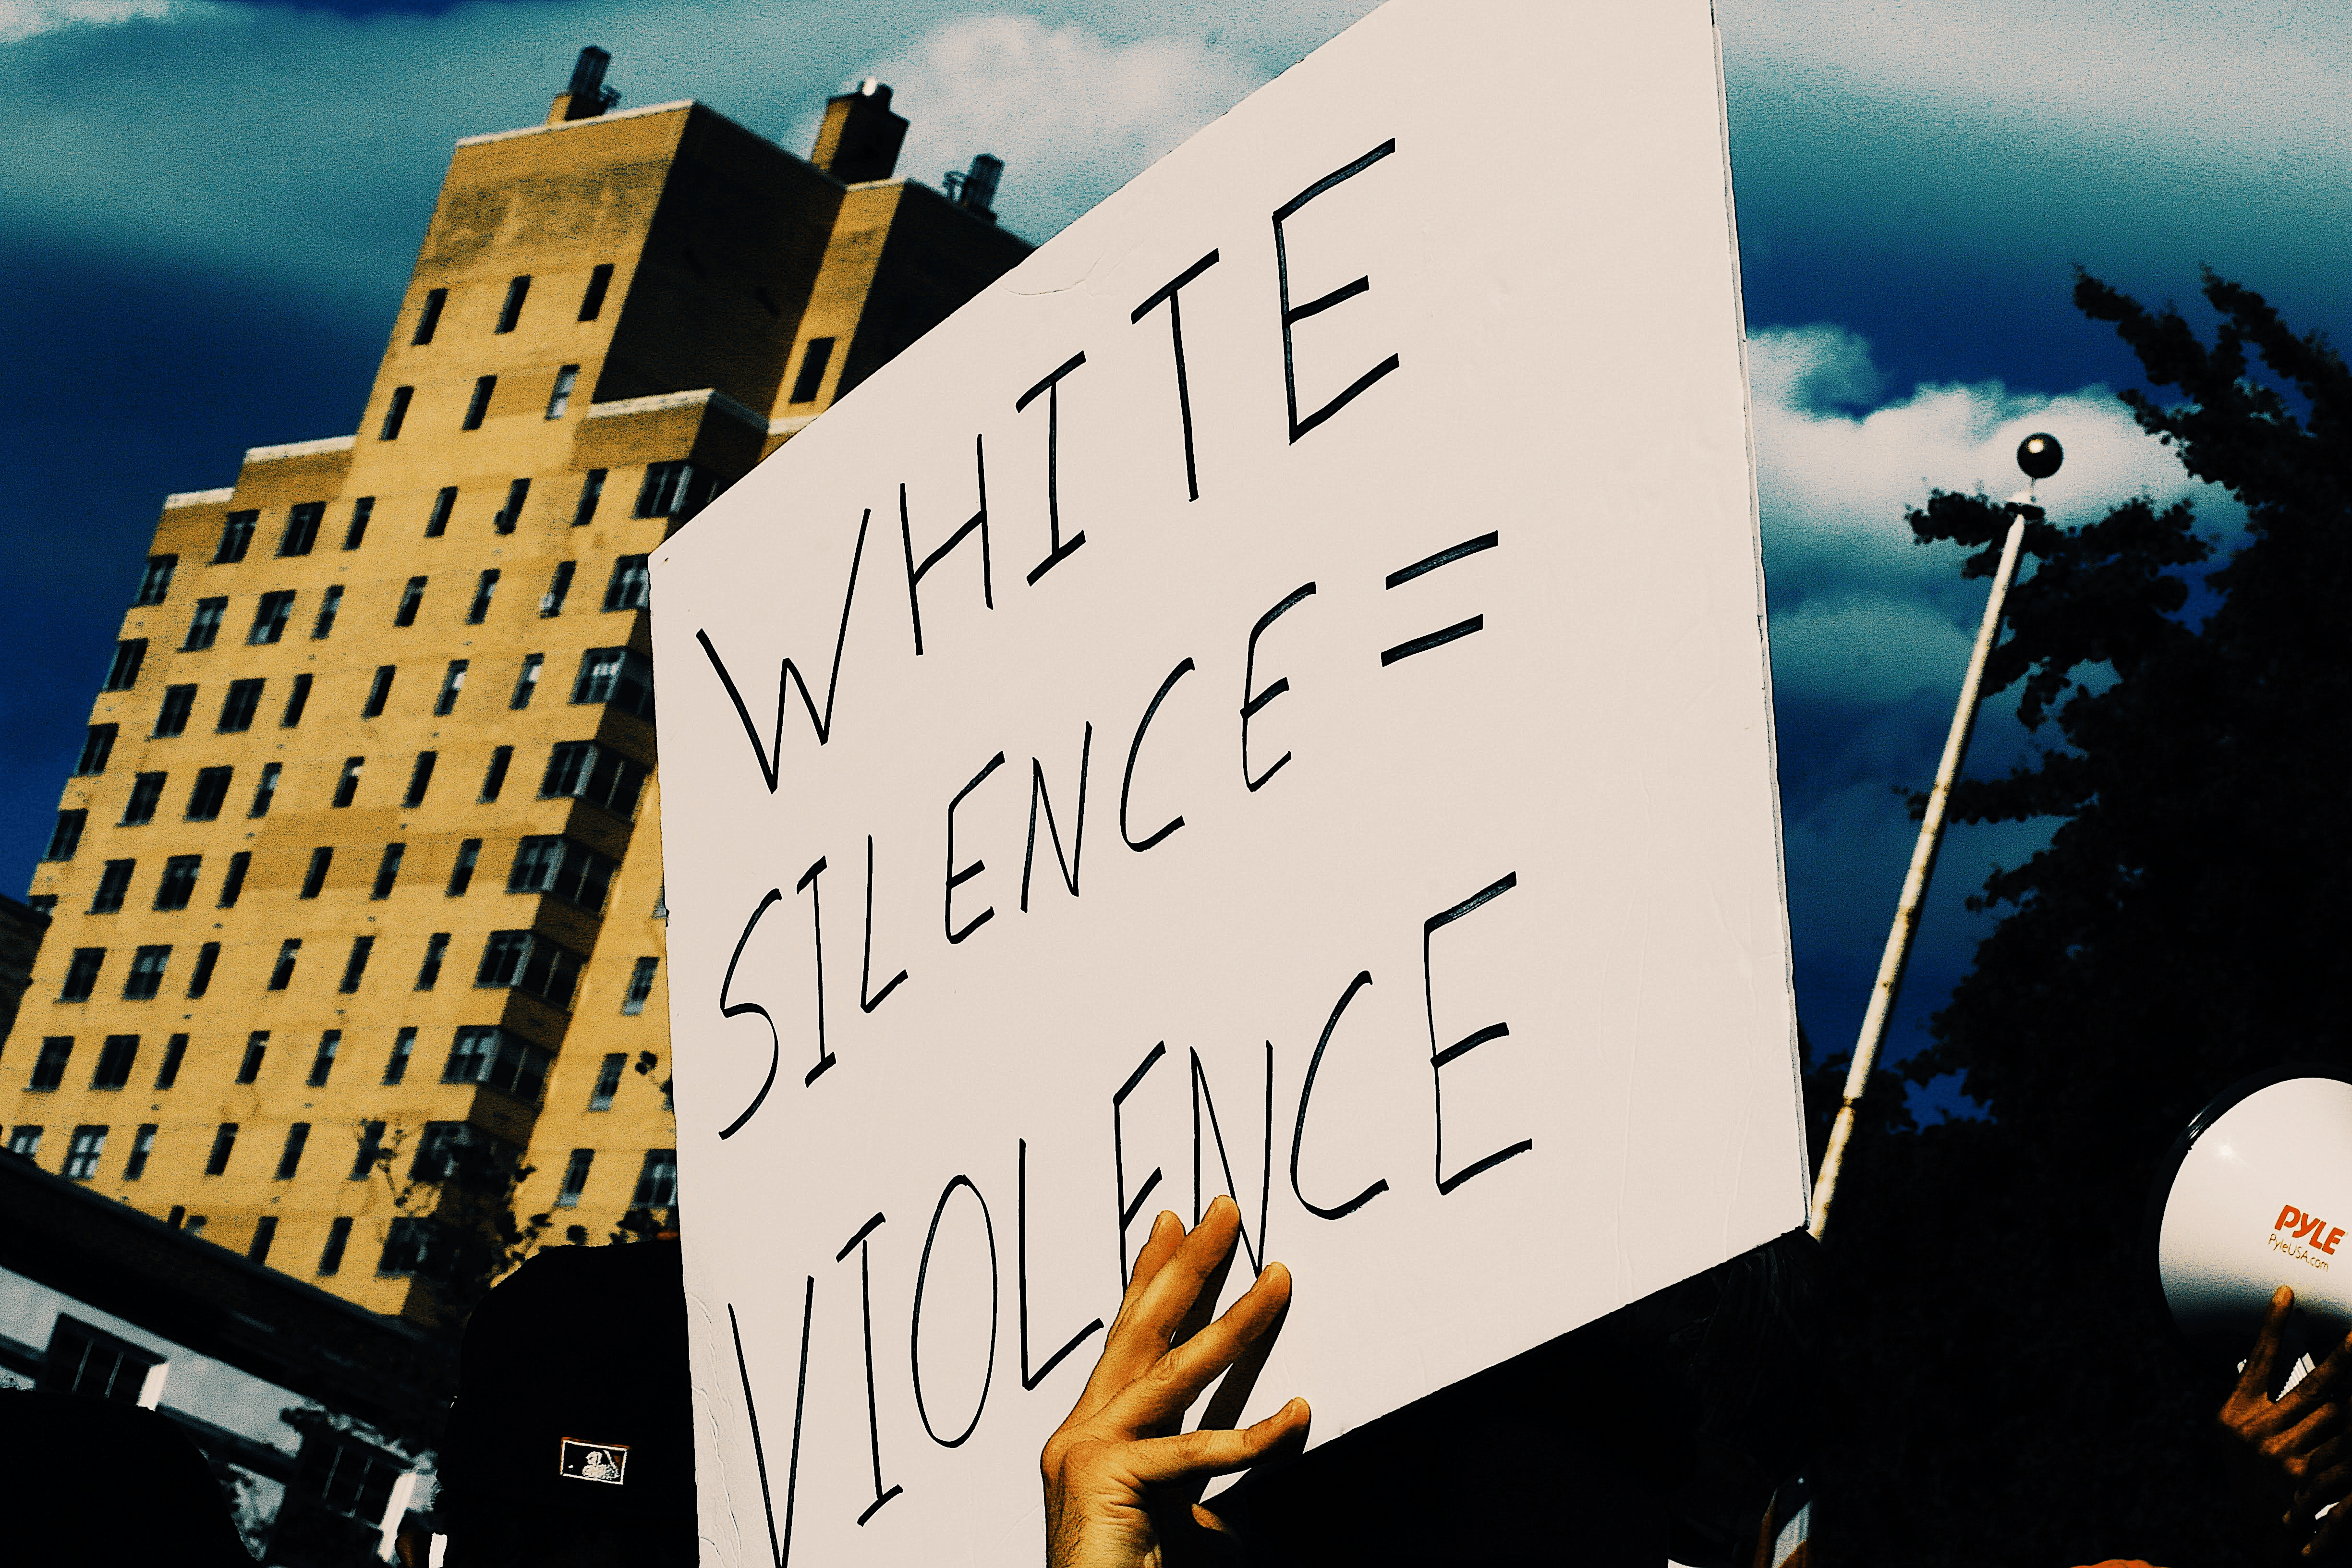 White Silence=Violence’ by Domo, Unsplashed Ltd, 2021 A protest sign being held up by people in New York stating  White Silence=Violence 